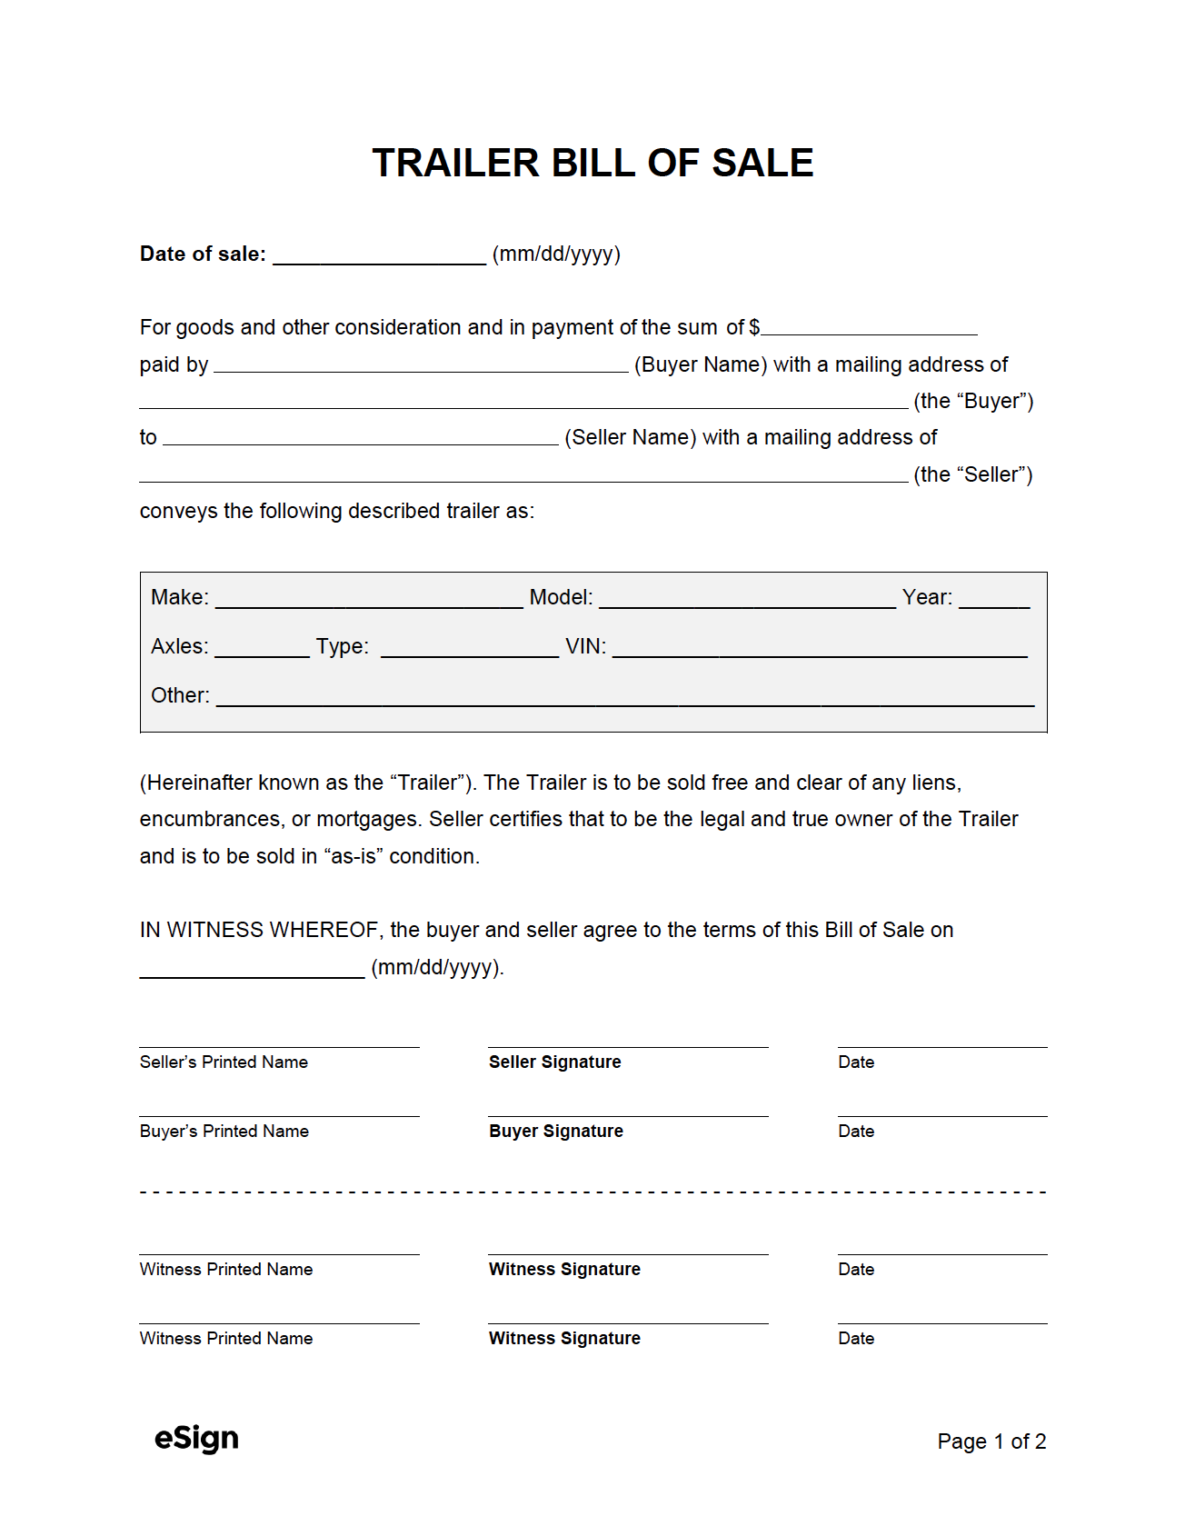 free-bill-of-sale-forms-pdf-word